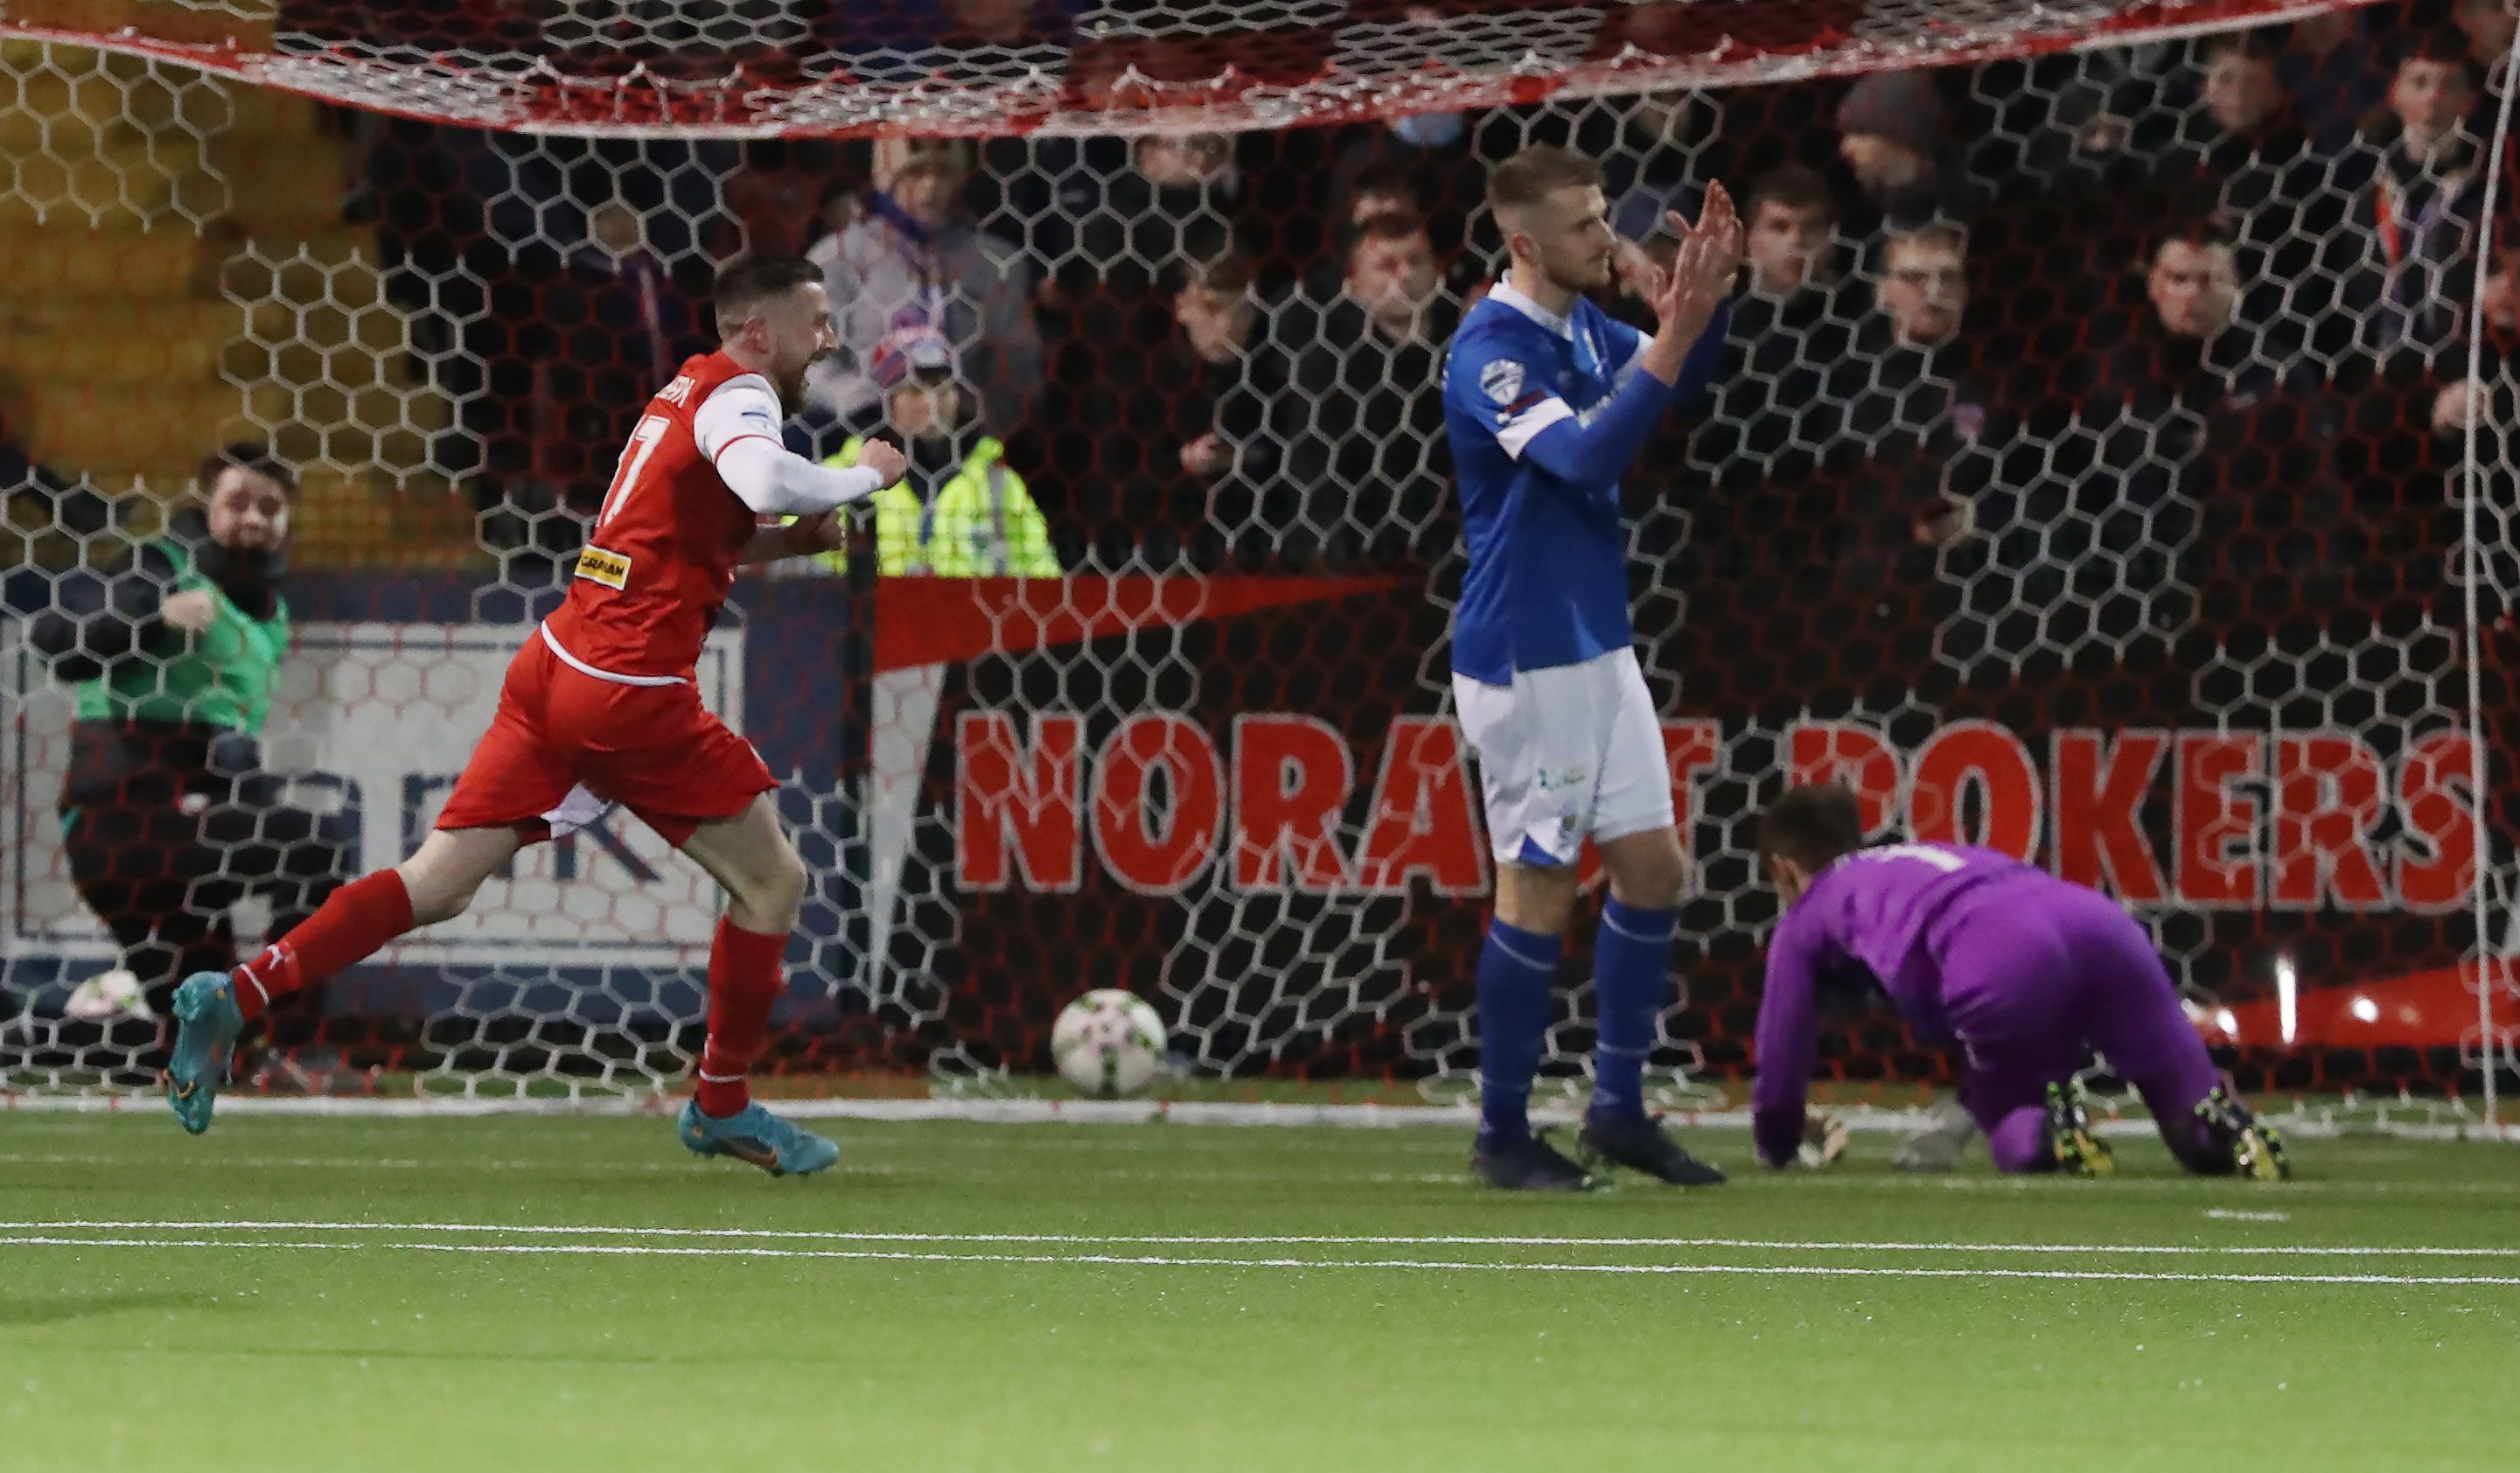 Ronan Doherty wheels away after scoring the only goal of the game at Solitude on Tuesday 